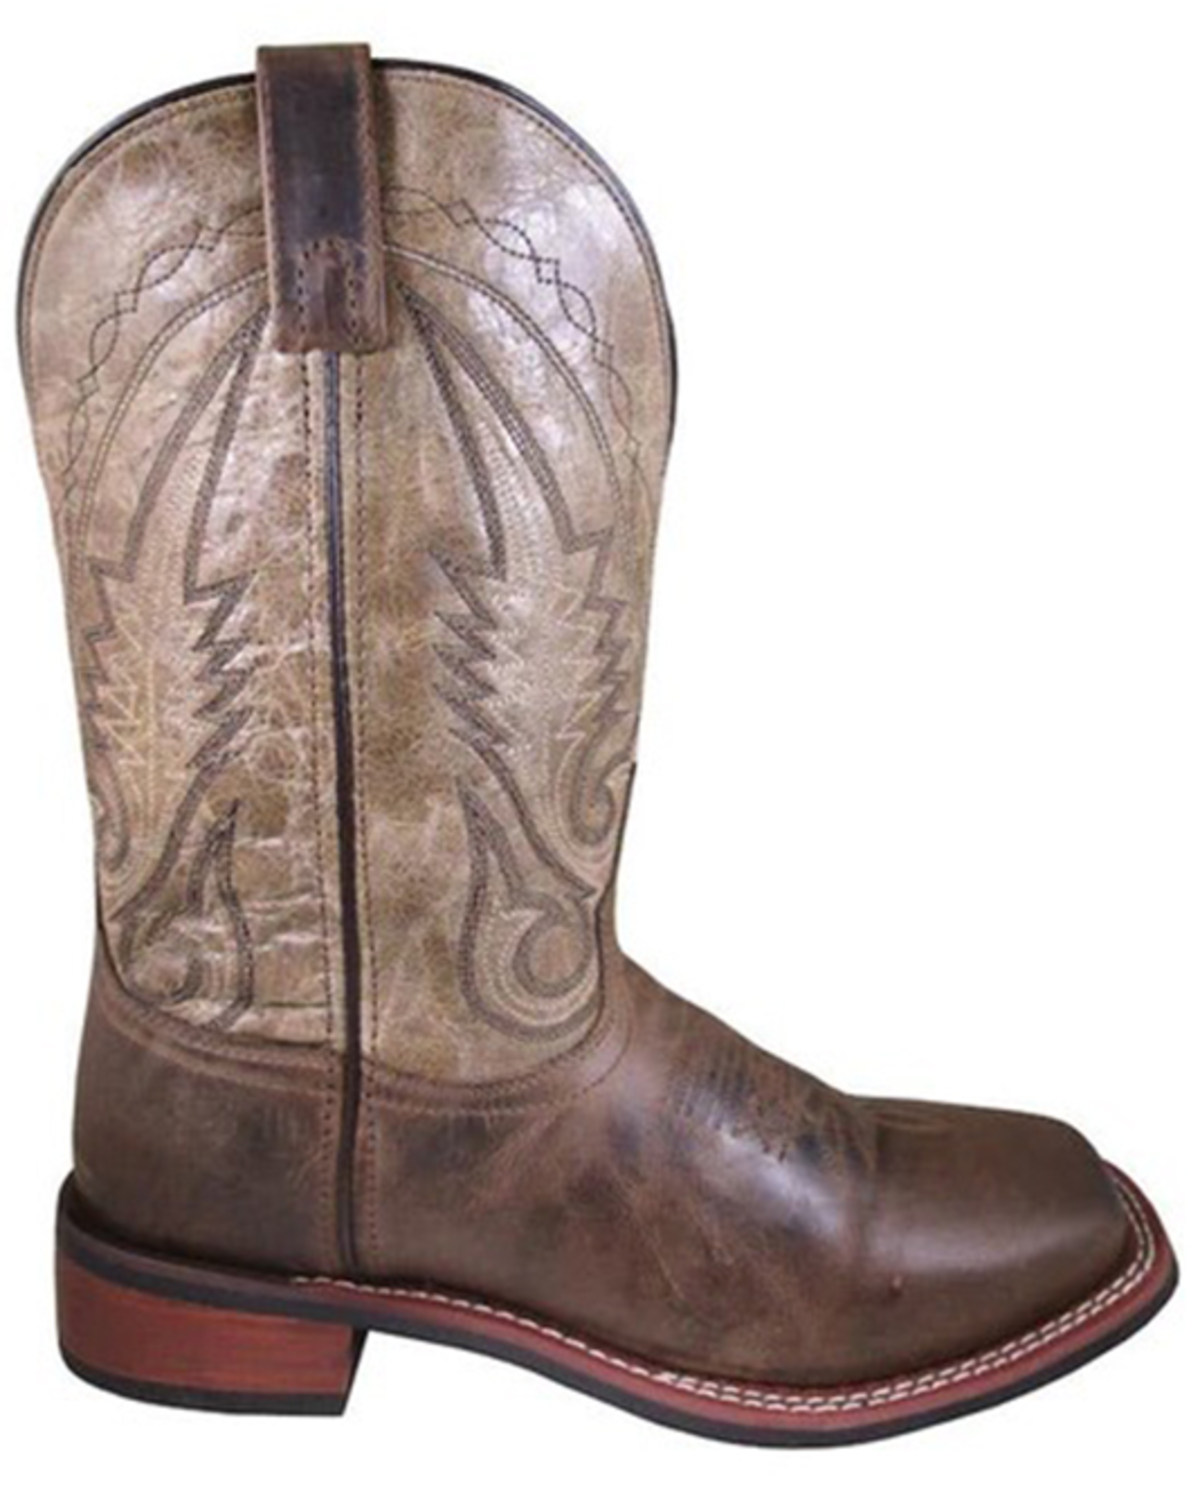 Smoky Mountain Men's Creekland Western Boots - Broad Square Toe